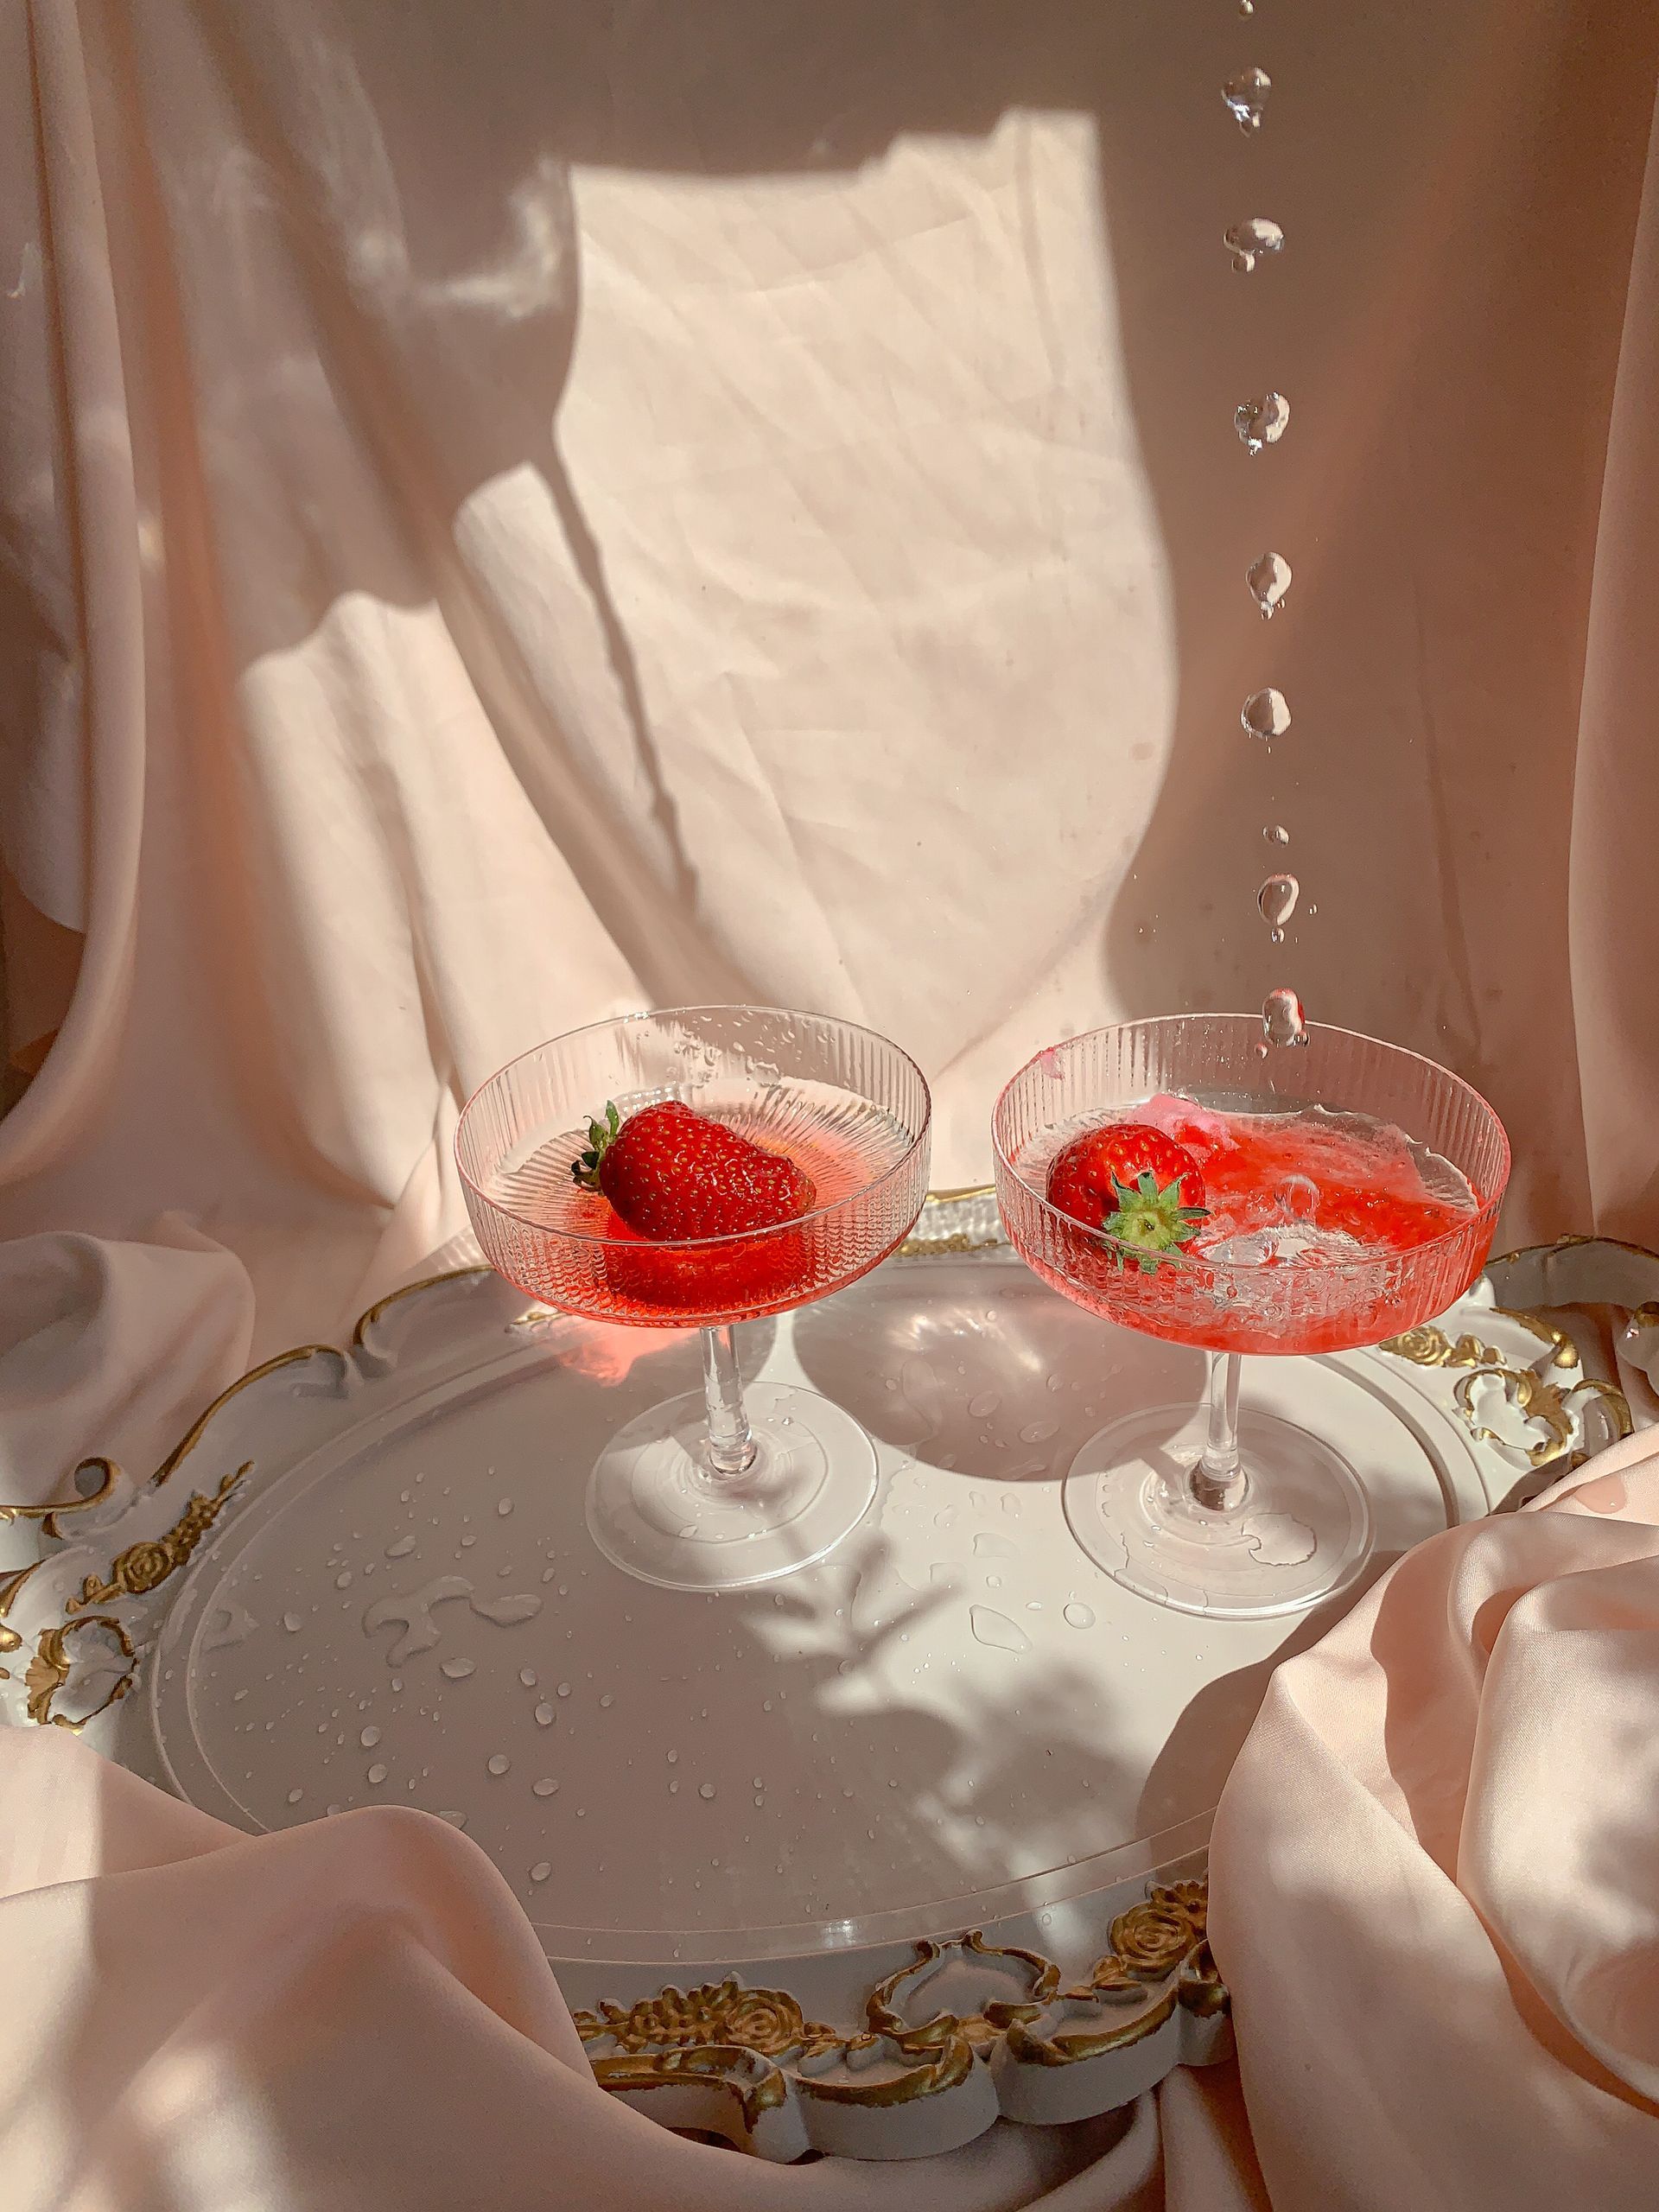 Two champagne glasses filled with strawberries on a tray.